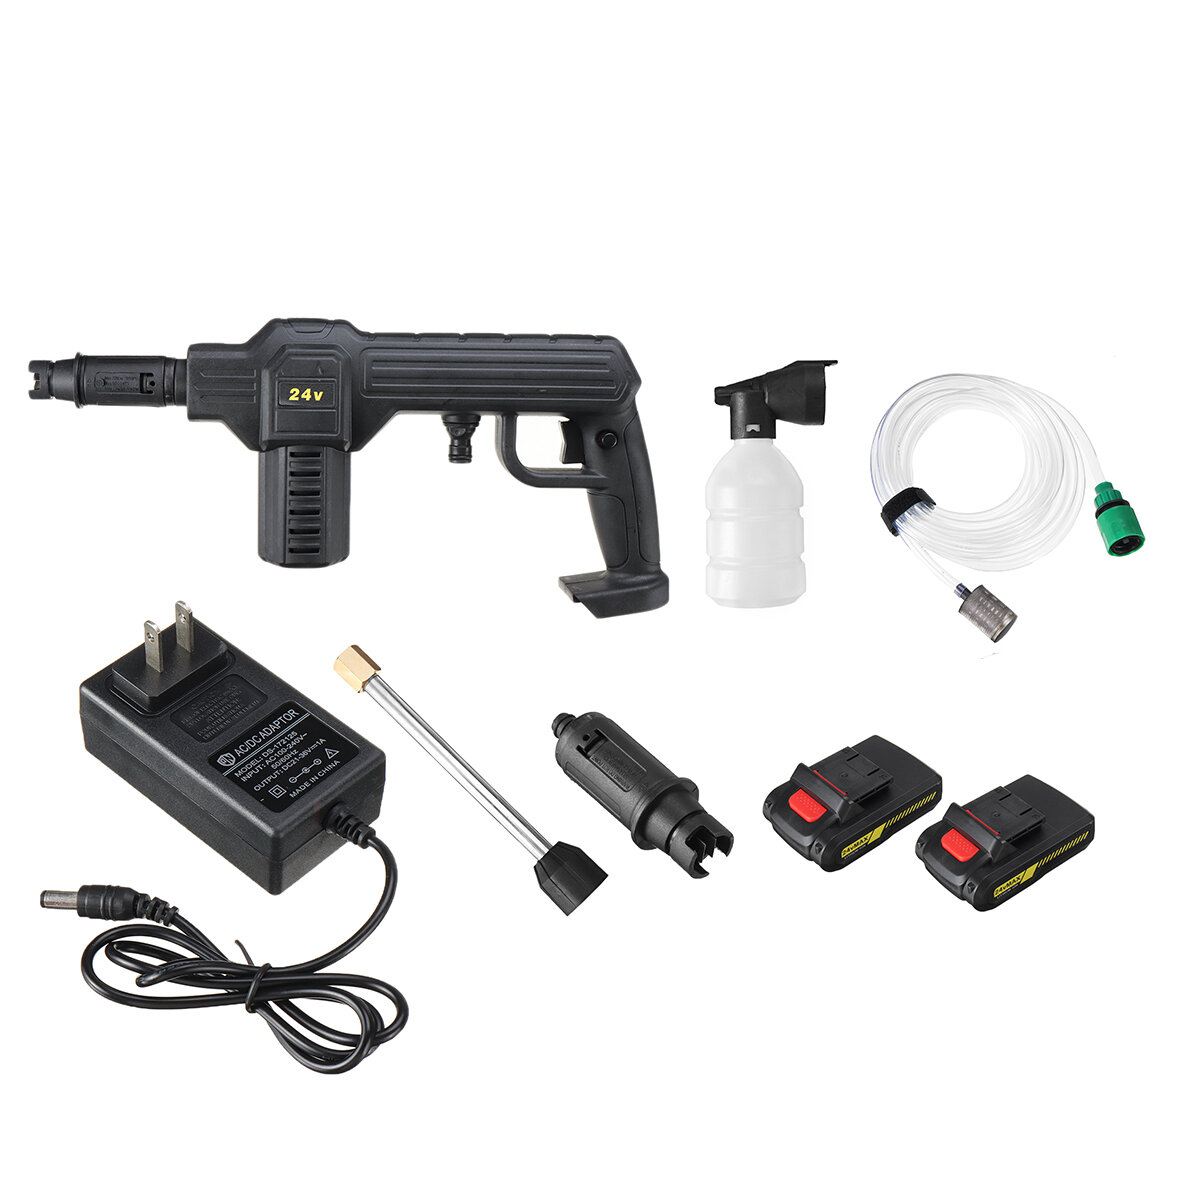 24V Cordless Power Washer Portable Li-ion Battery Washer Cleaner Pressure Washer Cleaner...